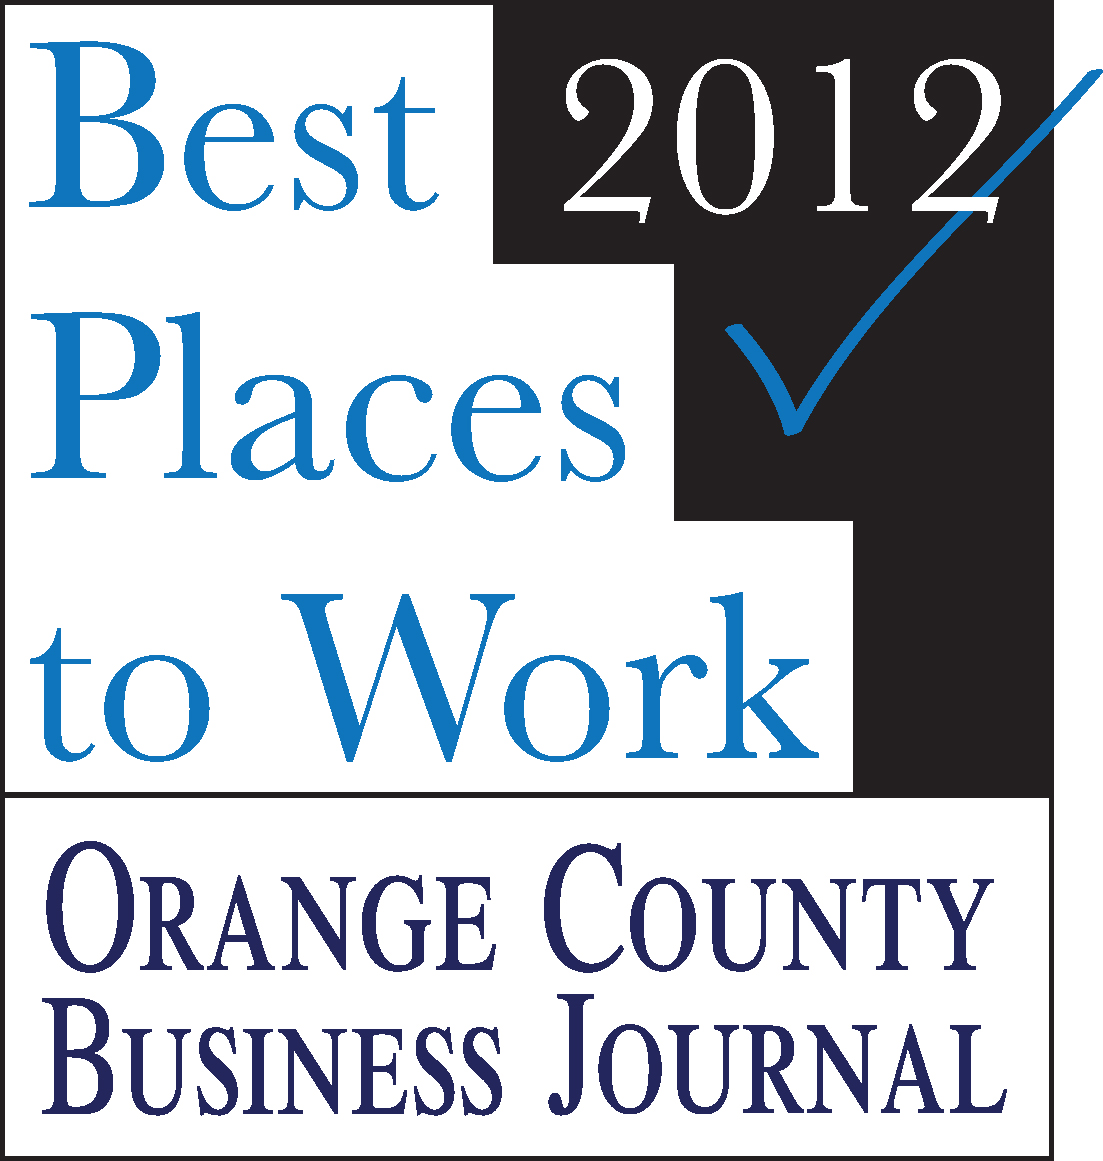 Best Places to Work 2012